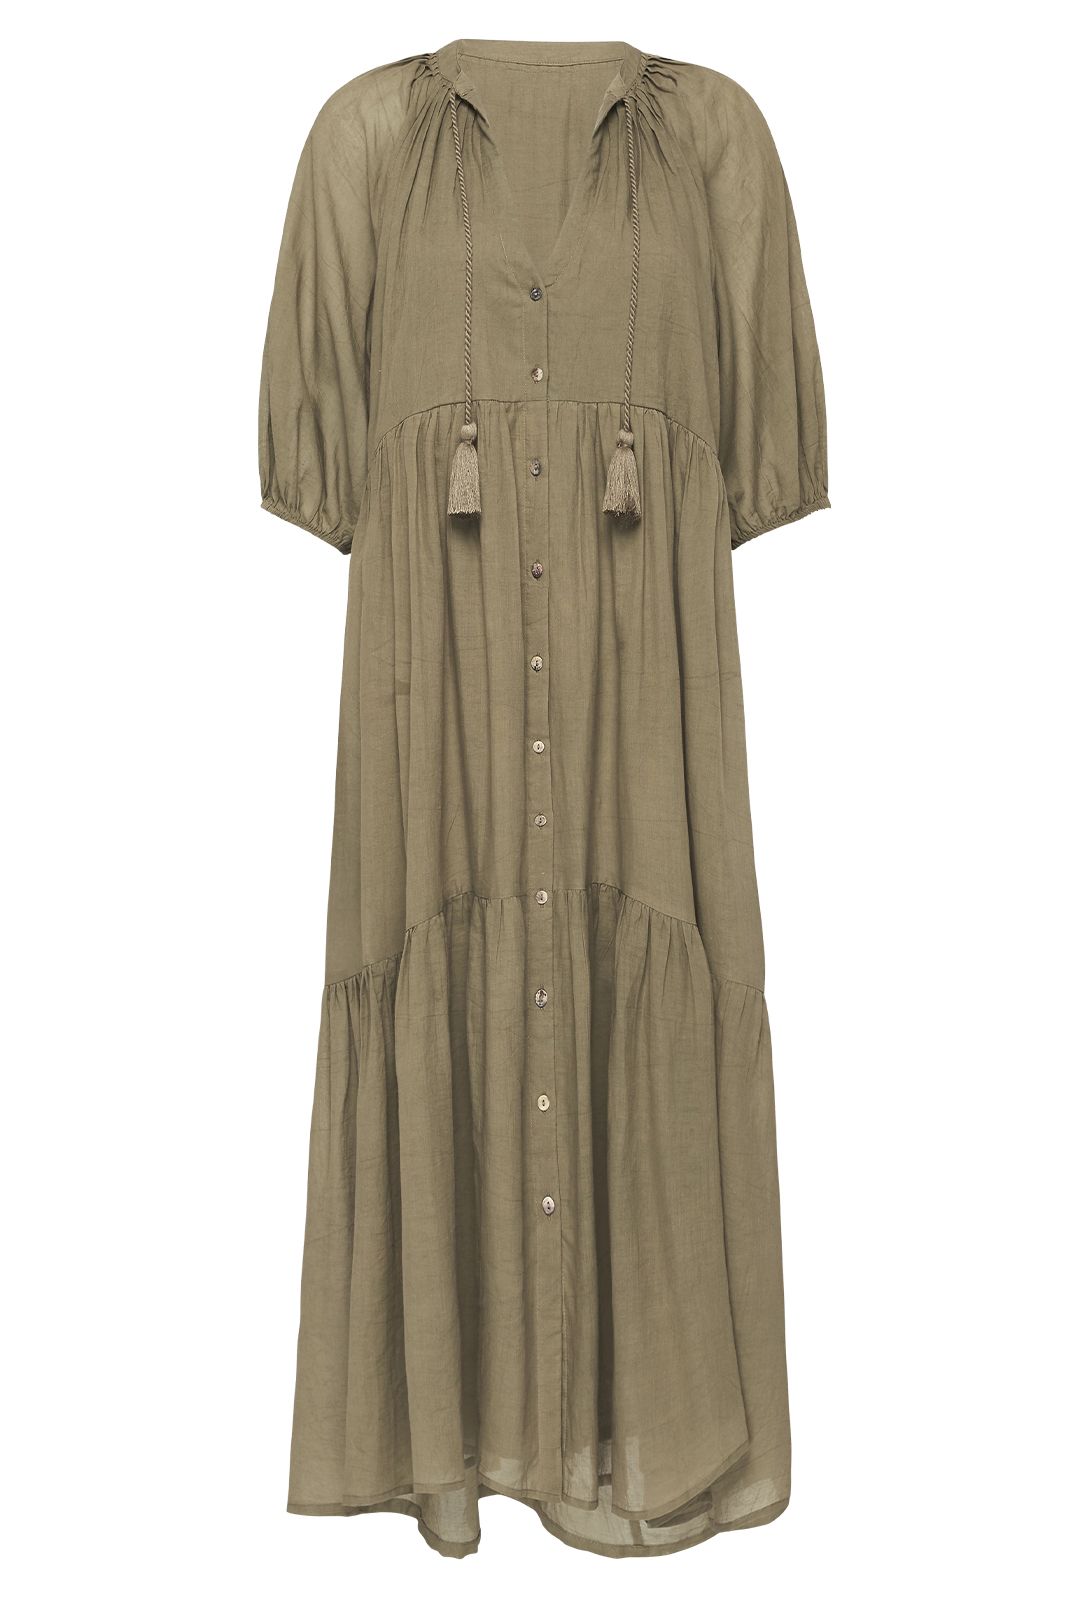 Spell Honey Smock Dress Olive Relaxed Fit